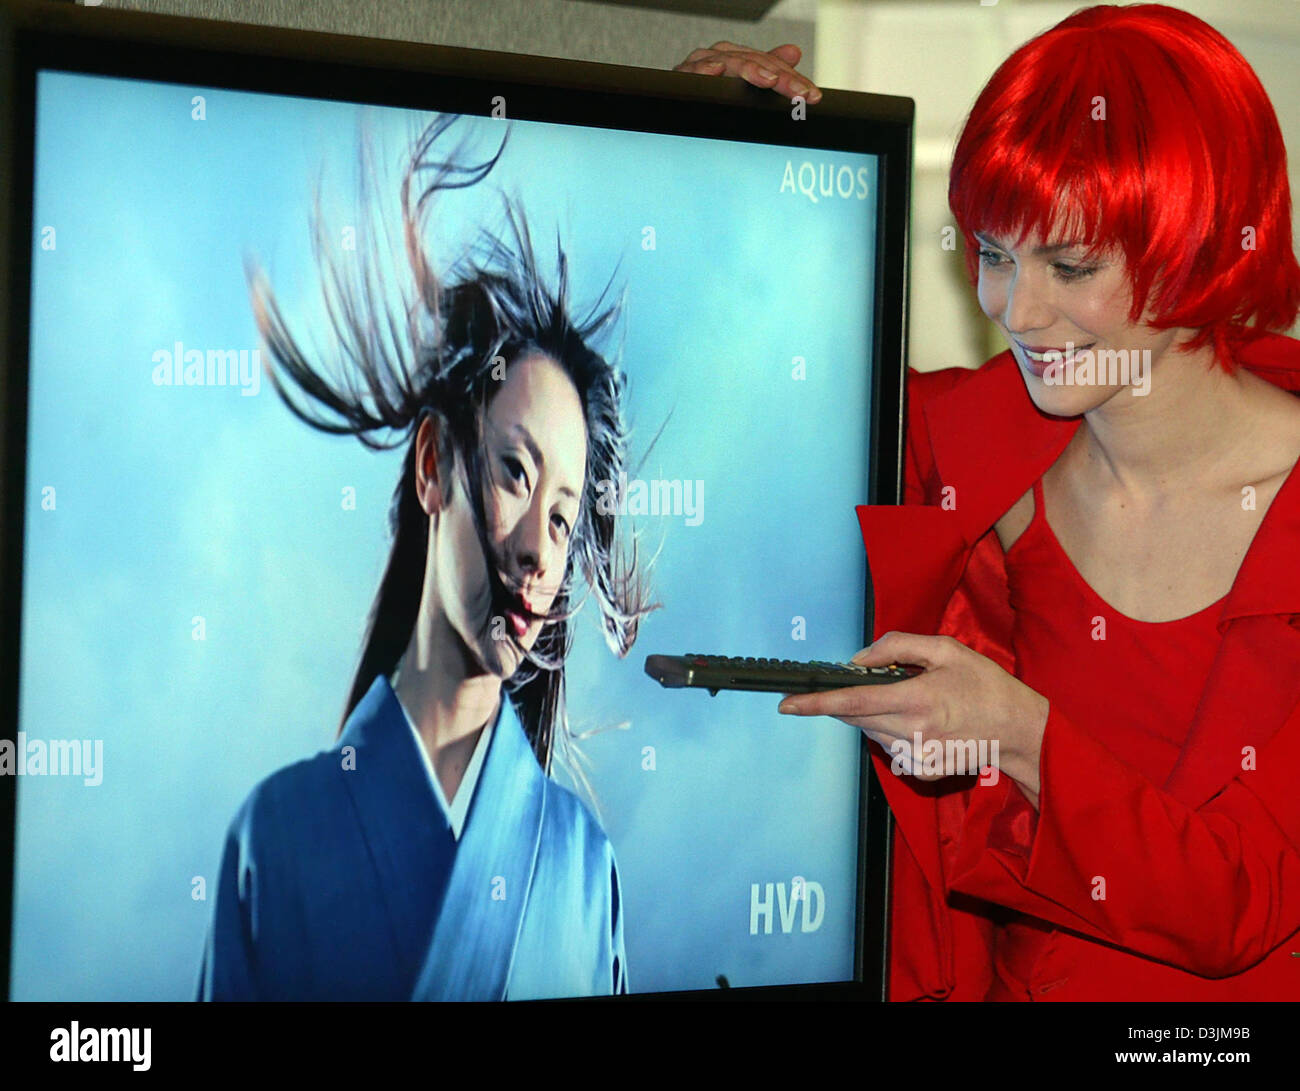 (dpa) - 'Miss IFA' activates with a remote control a flat screen in Berlin, Germany, 16 February 2005. During a press conference for the IFA (Internationale Funkausstellung/international radio exhibition) numerous novelties were announced to representatives of the press. The world's largest fair for consumer electronics will take place in Berlin between 2 and 7 September 2005. Stock Photo